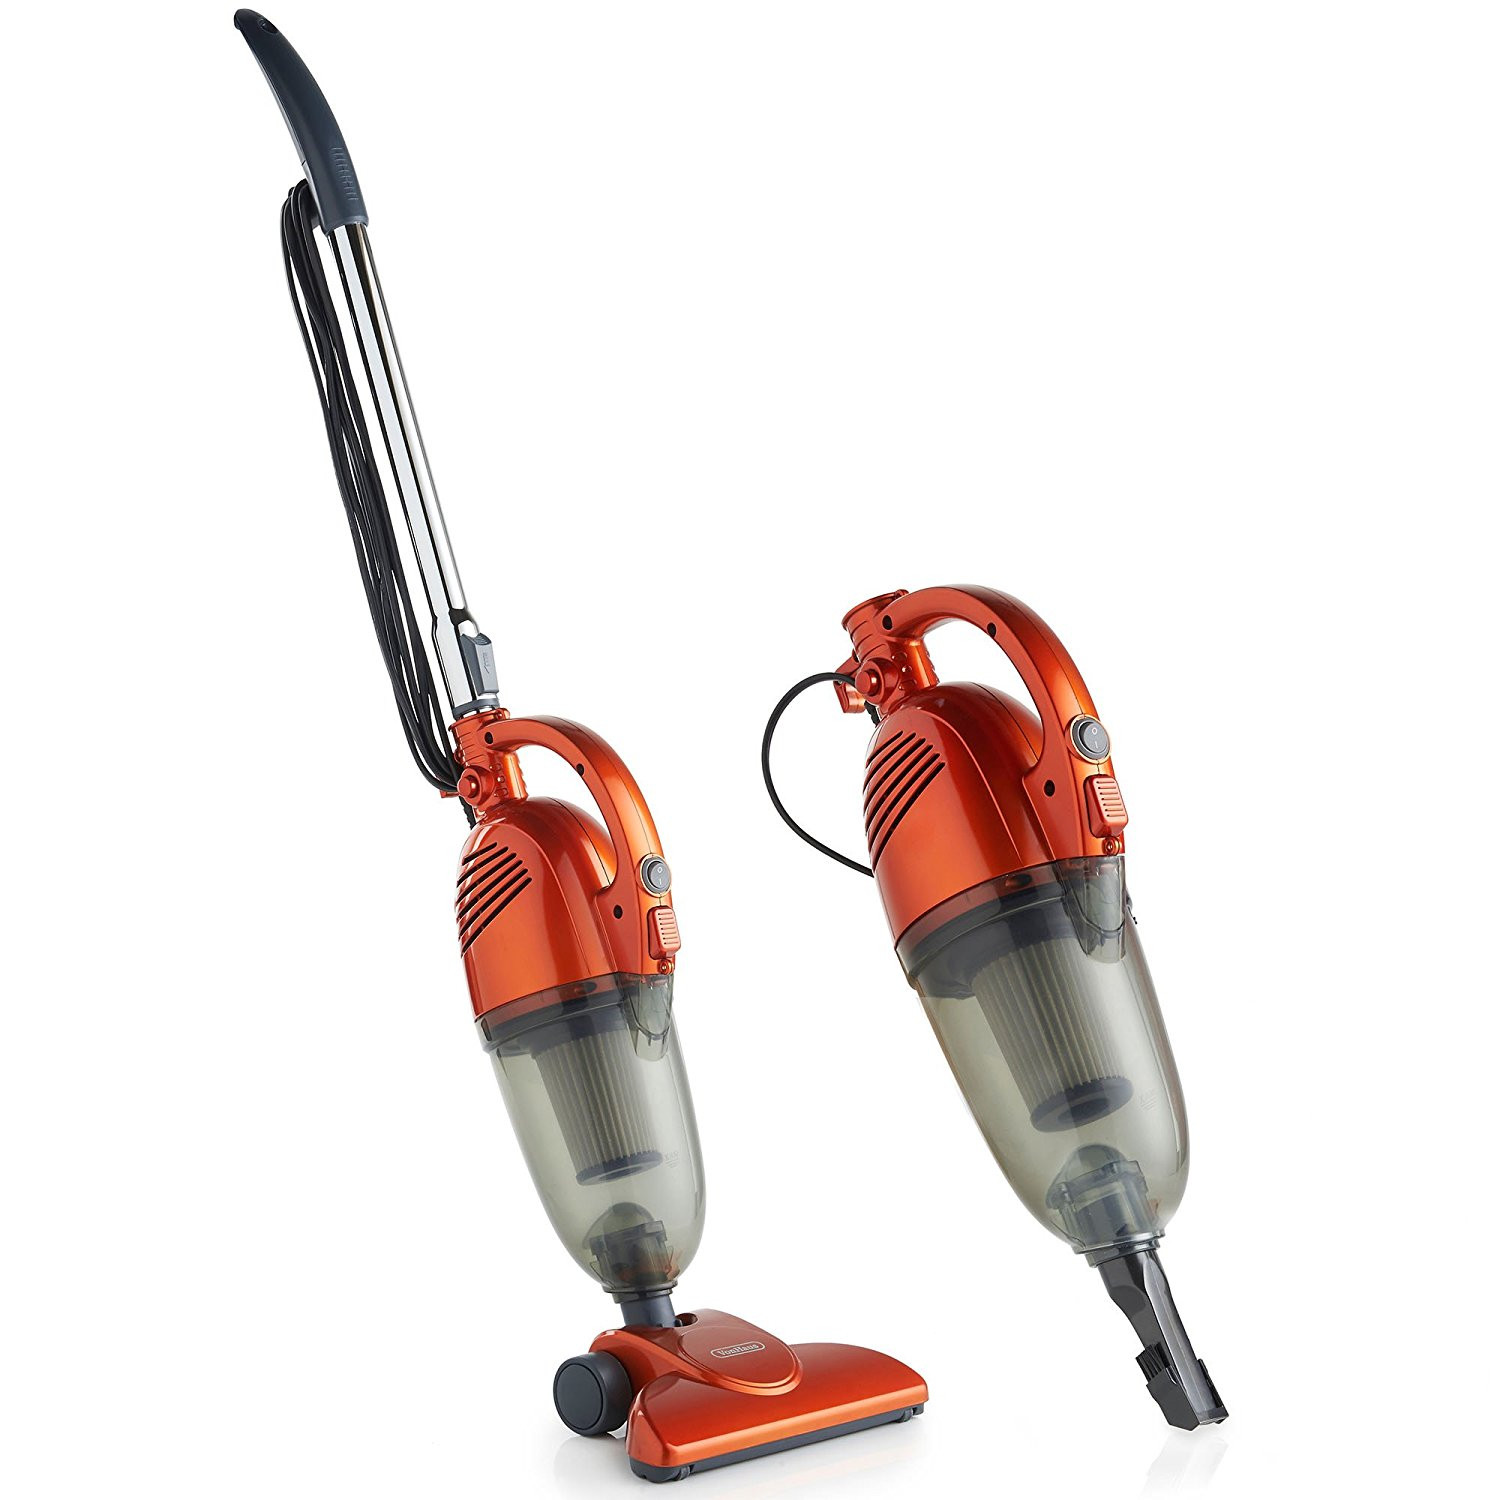 14 Lovely Hoover Hardwood Floor Cleaner 2024 free download hoover hardwood floor cleaner of 10 best vacuum for hardwood floors in 2018 complete guide with regard to vonhaus 600w 2 in 1 corded upright stick handheld vacuum cleaner with hepa